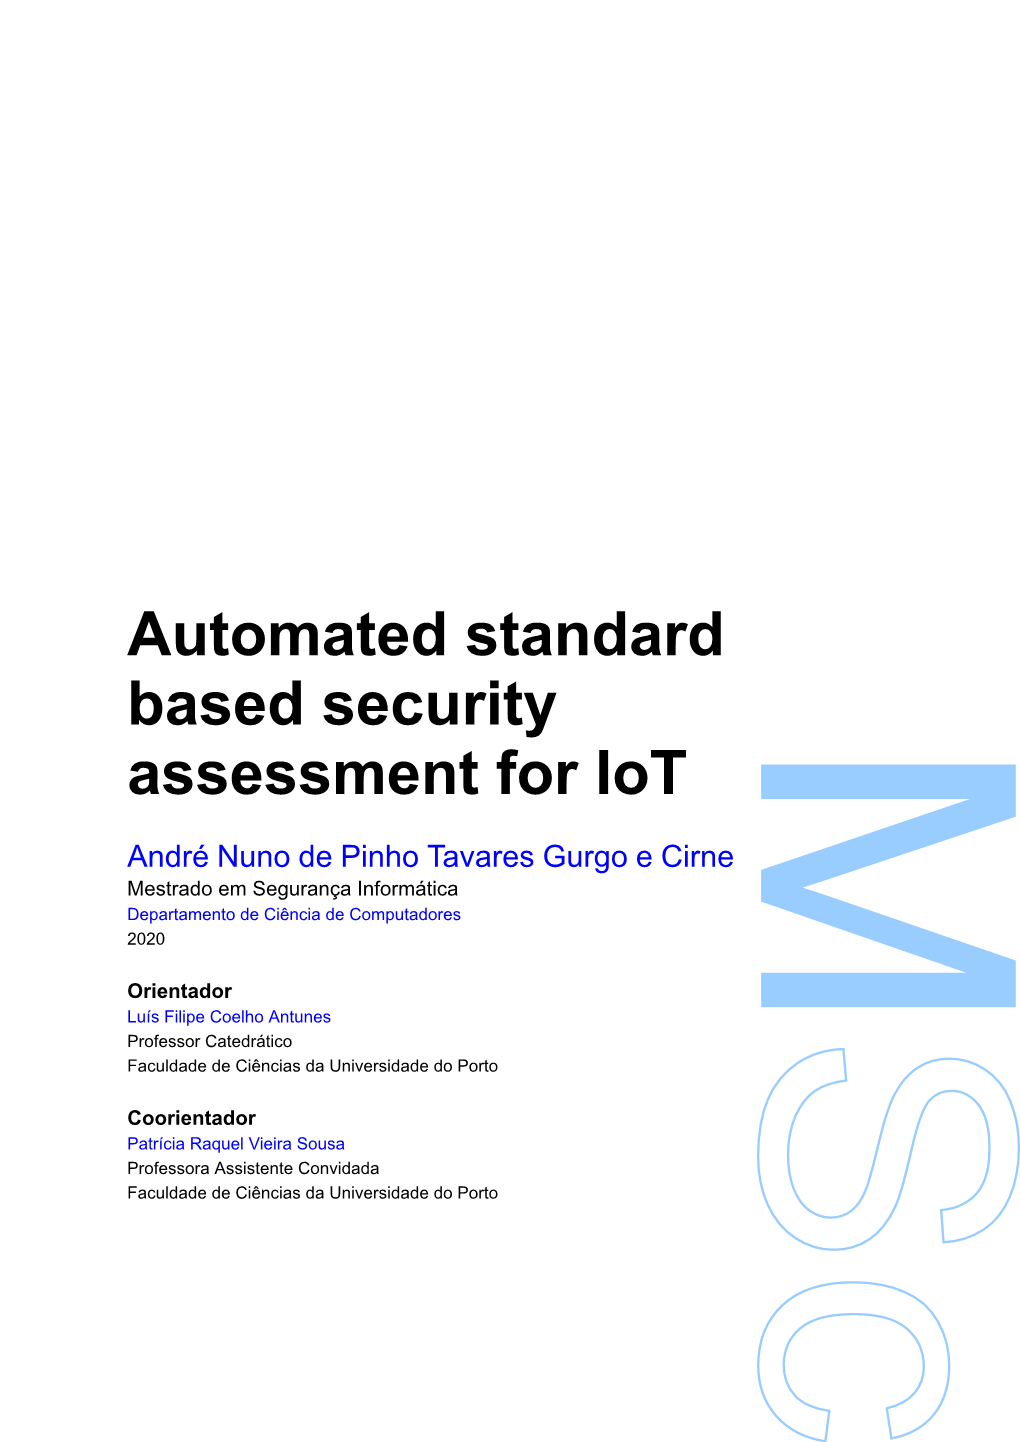 Automated Standard Based Security Assessment for Iot